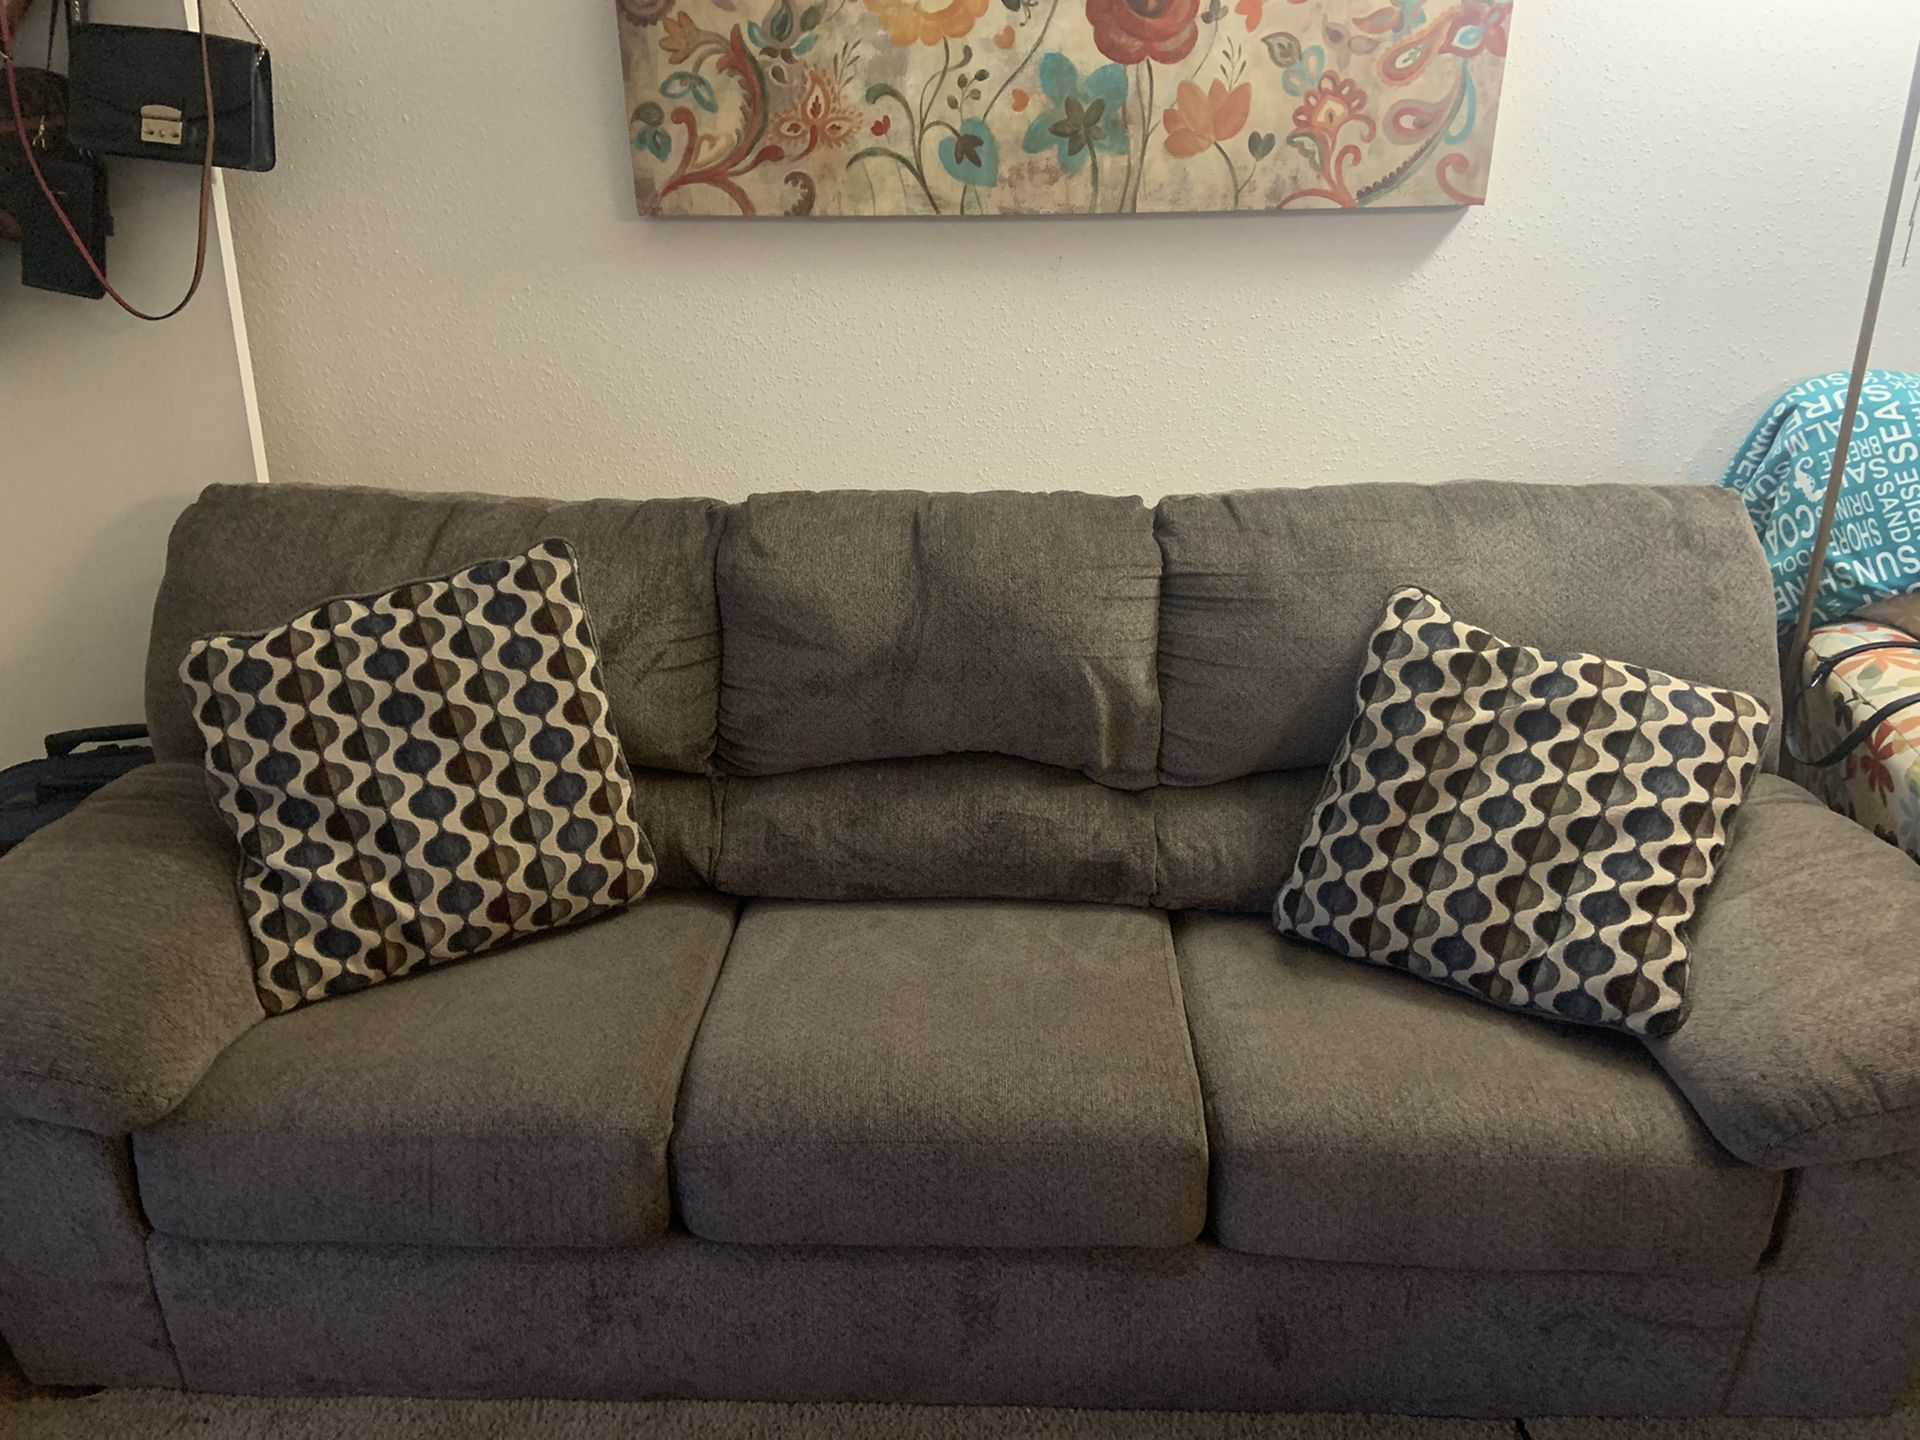 Comfy couch in great condition.